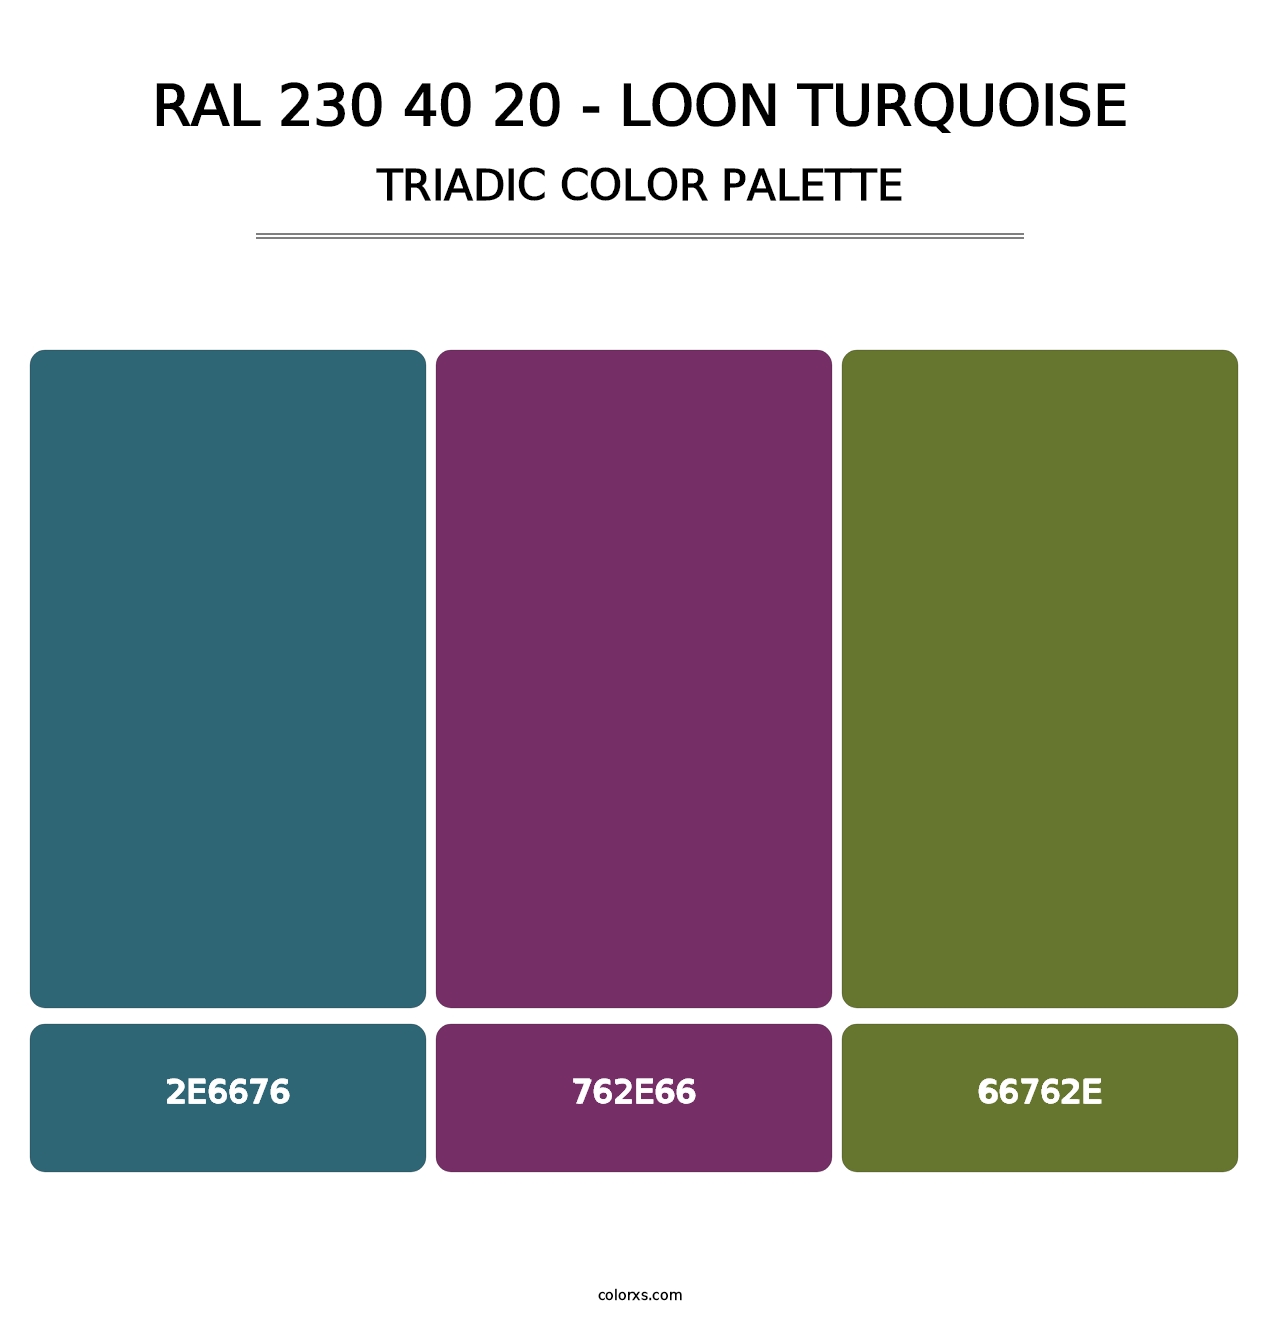 RAL 230 40 20 - Loon Turquoise - Triadic Color Palette